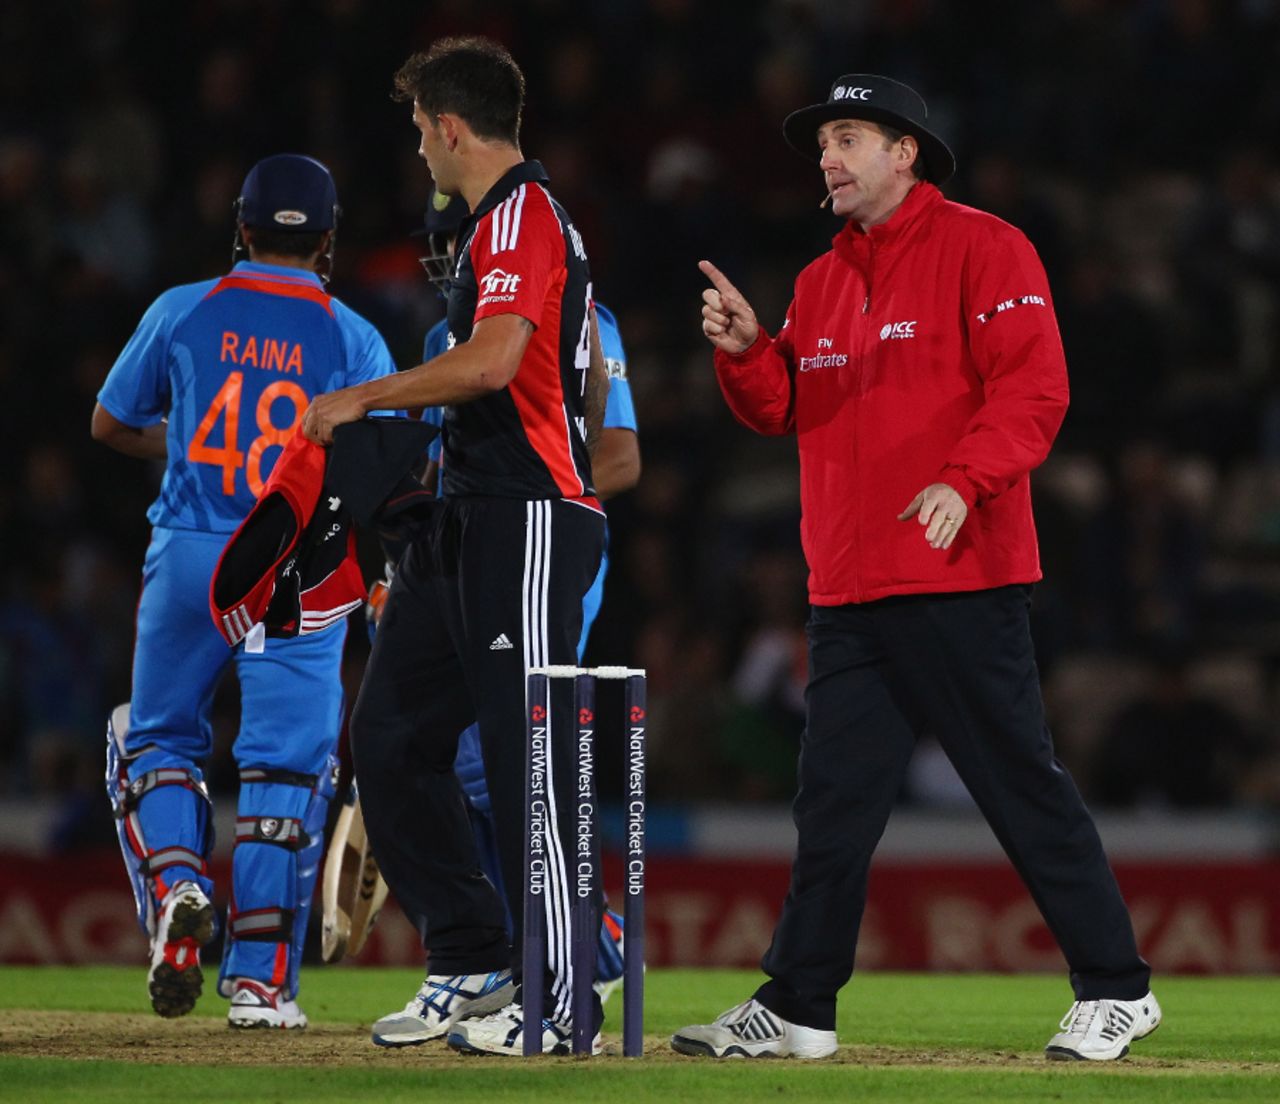 Jade Dernbach is reprimanded by umpire Rob Bailey after a spat with Suresh Raina, England v India, 2nd ODI, Rose Bowl, September 6 2011